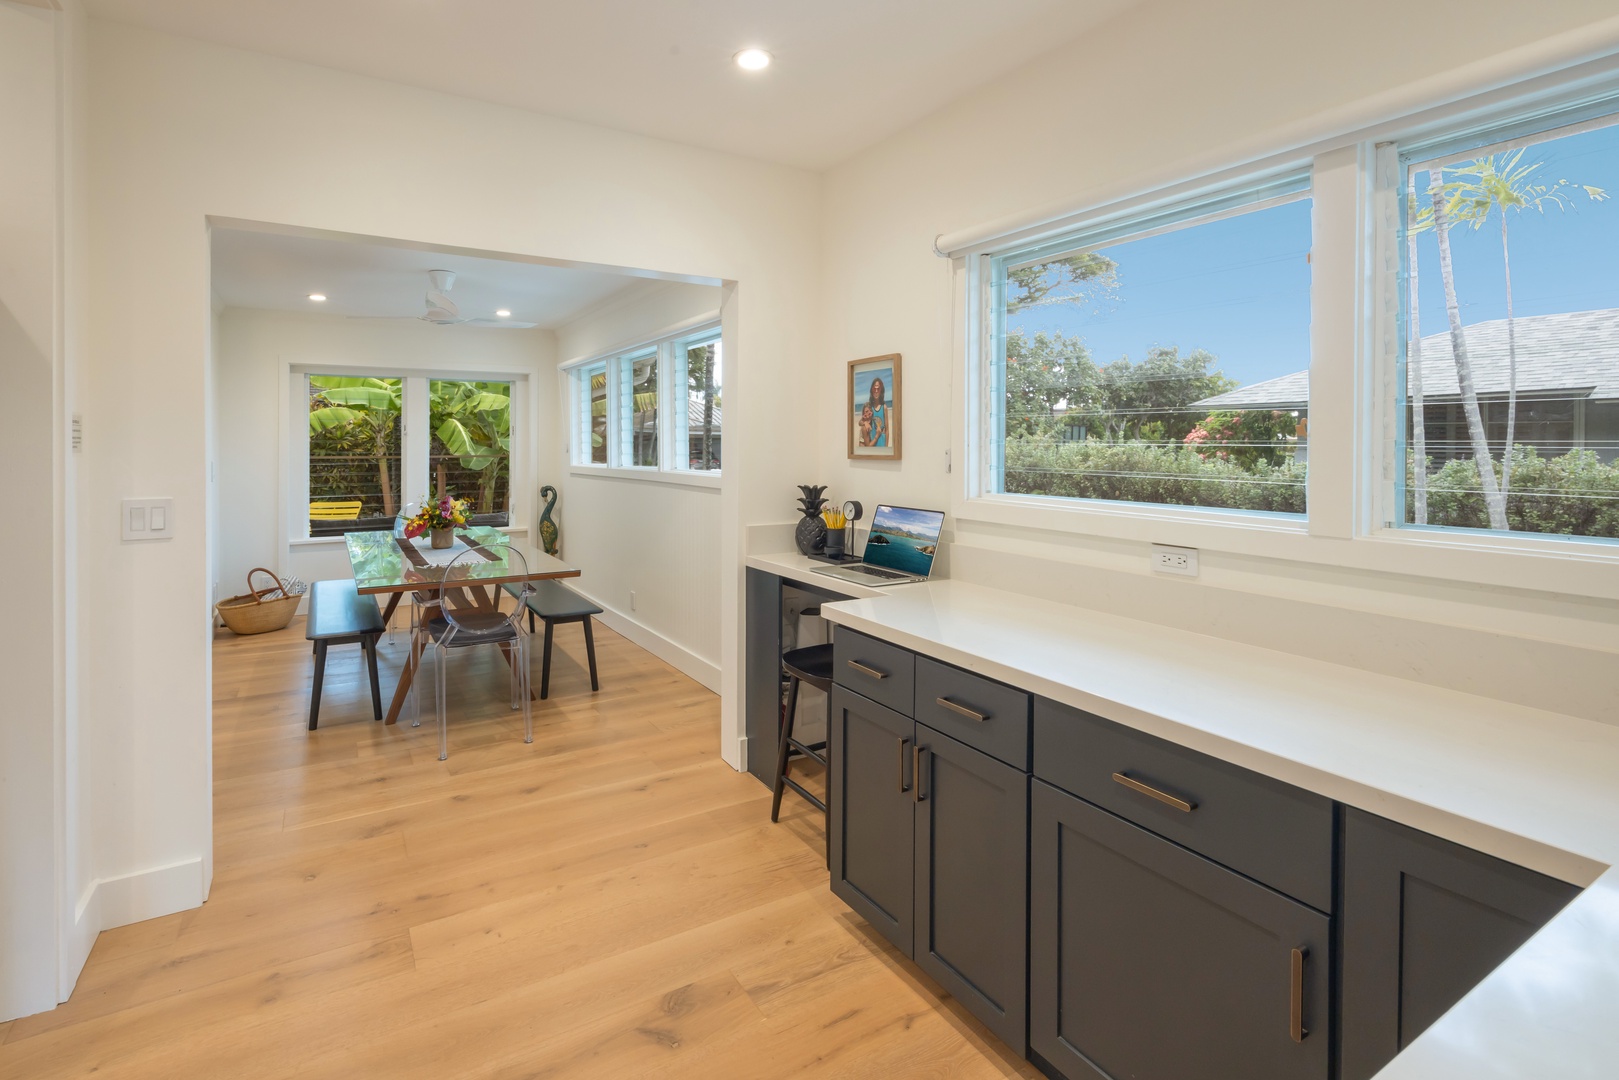 Kailua Vacation Rentals, Lanikai Ola Nani - Abundance of countertop space – a haven for culinary enthusiasts or those seeking a cozy work space.